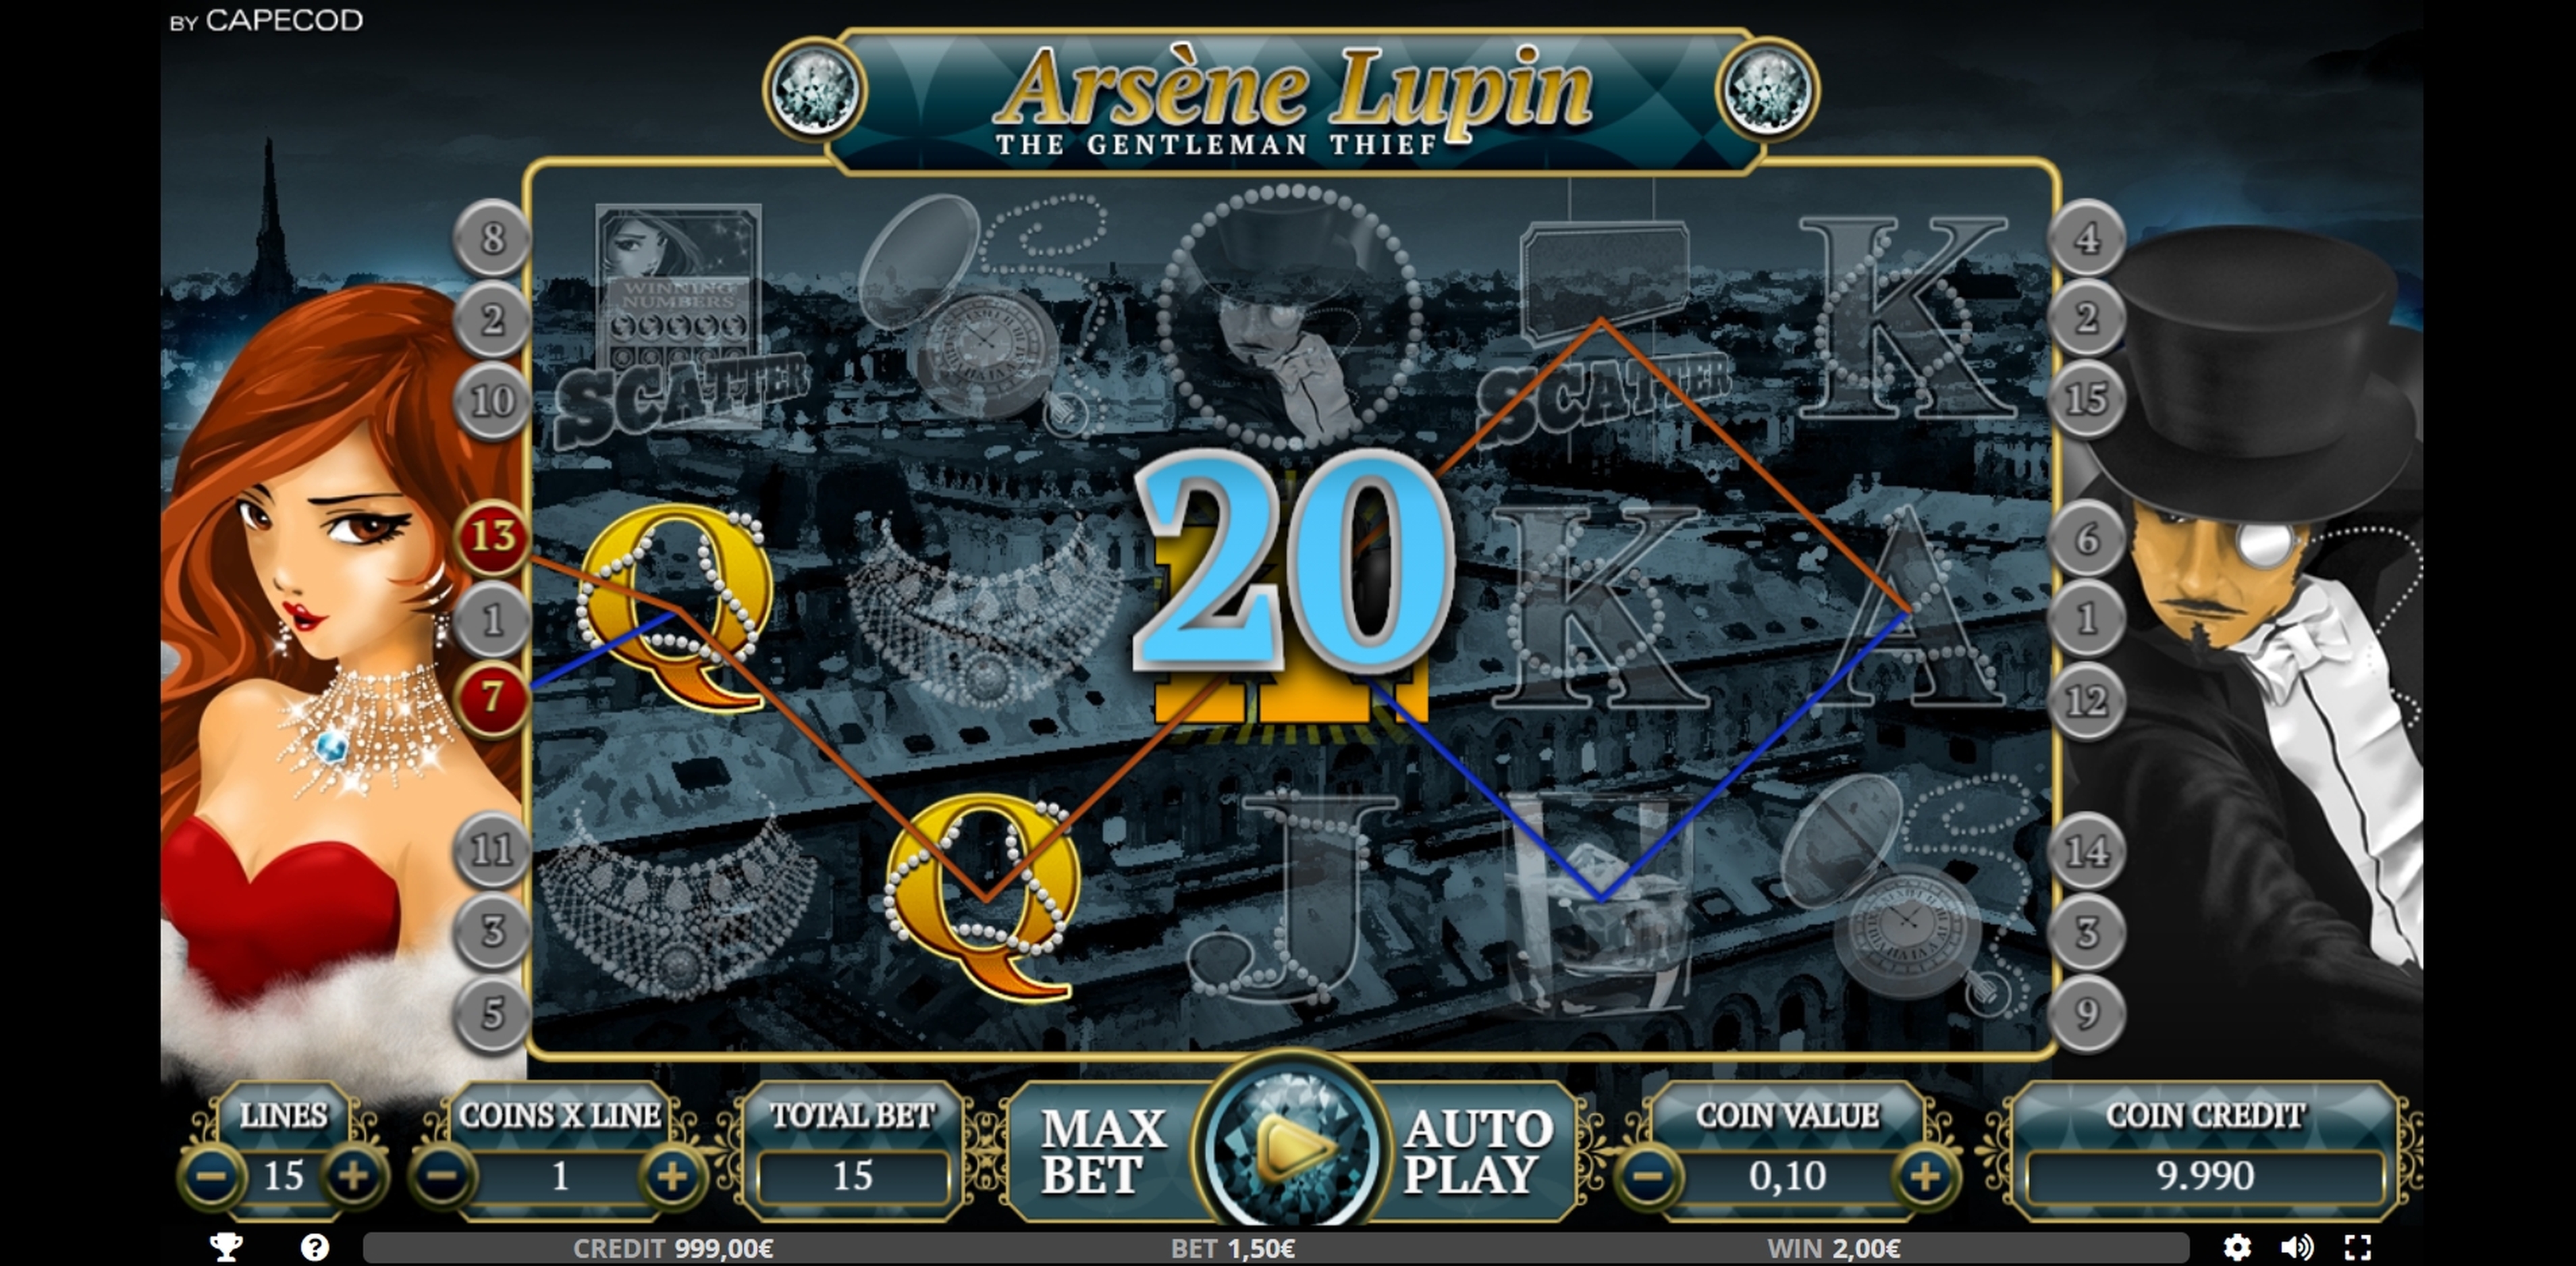 Win Money in Arsène Lupin Free Slot Game by Capecod Gaming